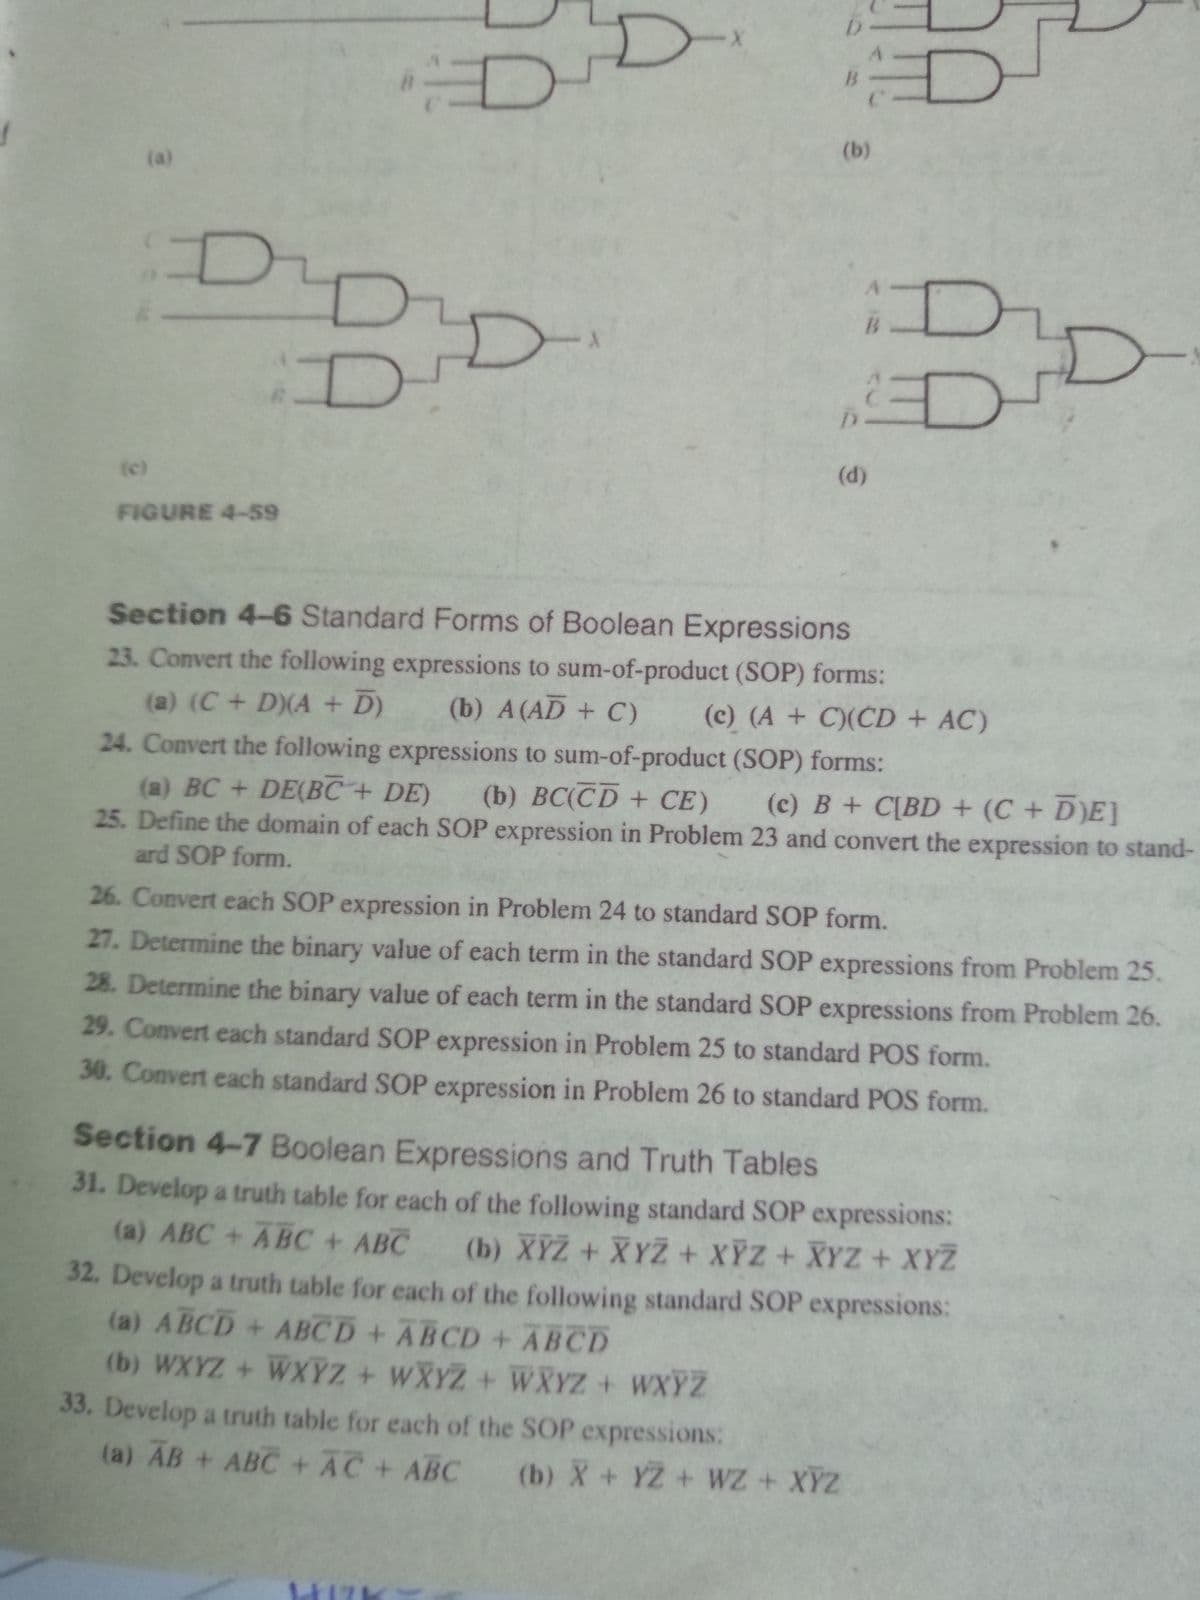 (b)
(a)
B
D'
(d)
(c)
FIGURE 4-59
Section 4-6 Standard Forms of Boolean Expressions
23. Convert the following expressions to sum-of-product (SOP) forms:
(a) (C + D)(A + D)
(b) A (AD + C)
(c) (A + C)(CD + AC)
24. Convert the following expressions to sum-of-product (SOP) forms:
(a) BC + DE(BC + DE)
(b) ВС(CD + СЕ)
25. Define the domain of each SOP expression in Problem 23 and convert the expression to stand-
(c) B + C[BD + (C + D)E]
ard SOP form.
26. Convert each SOP expression in Problem 24 to standard SOP form.
27. Determine the binary value of each term in the standard SOP expressions from Problem 25.
28. Determine the binary value of each term in the standard SOP expressions from Problem 26.
29. Convert each standard SOP expression in Problem 25 to standard POS form.
30. Convert each standard SOP expression in Problem 26 to standard POS form.
Section 4-7 Boolean Expressions and Truth Tables
31. Develop a truth table for each of the following standard SOP expressions:
(a) ABC +ABC + ABC
(b) XYZ + XYZ + XỸZ+ XYZ + XYZ
32. Develop a truth table for each of the following standard SOP expressions:
(a) ABCD + ABCD + ABCD + ABCD
(b) WXYZ + WXYZ + WXYZ + WXYZ + WXYZ
33. Develop a truth table for each of the SOP expressions:
(a) AB + ABC + AC+ ABC (b) X + YZ + WZ + XYZ
